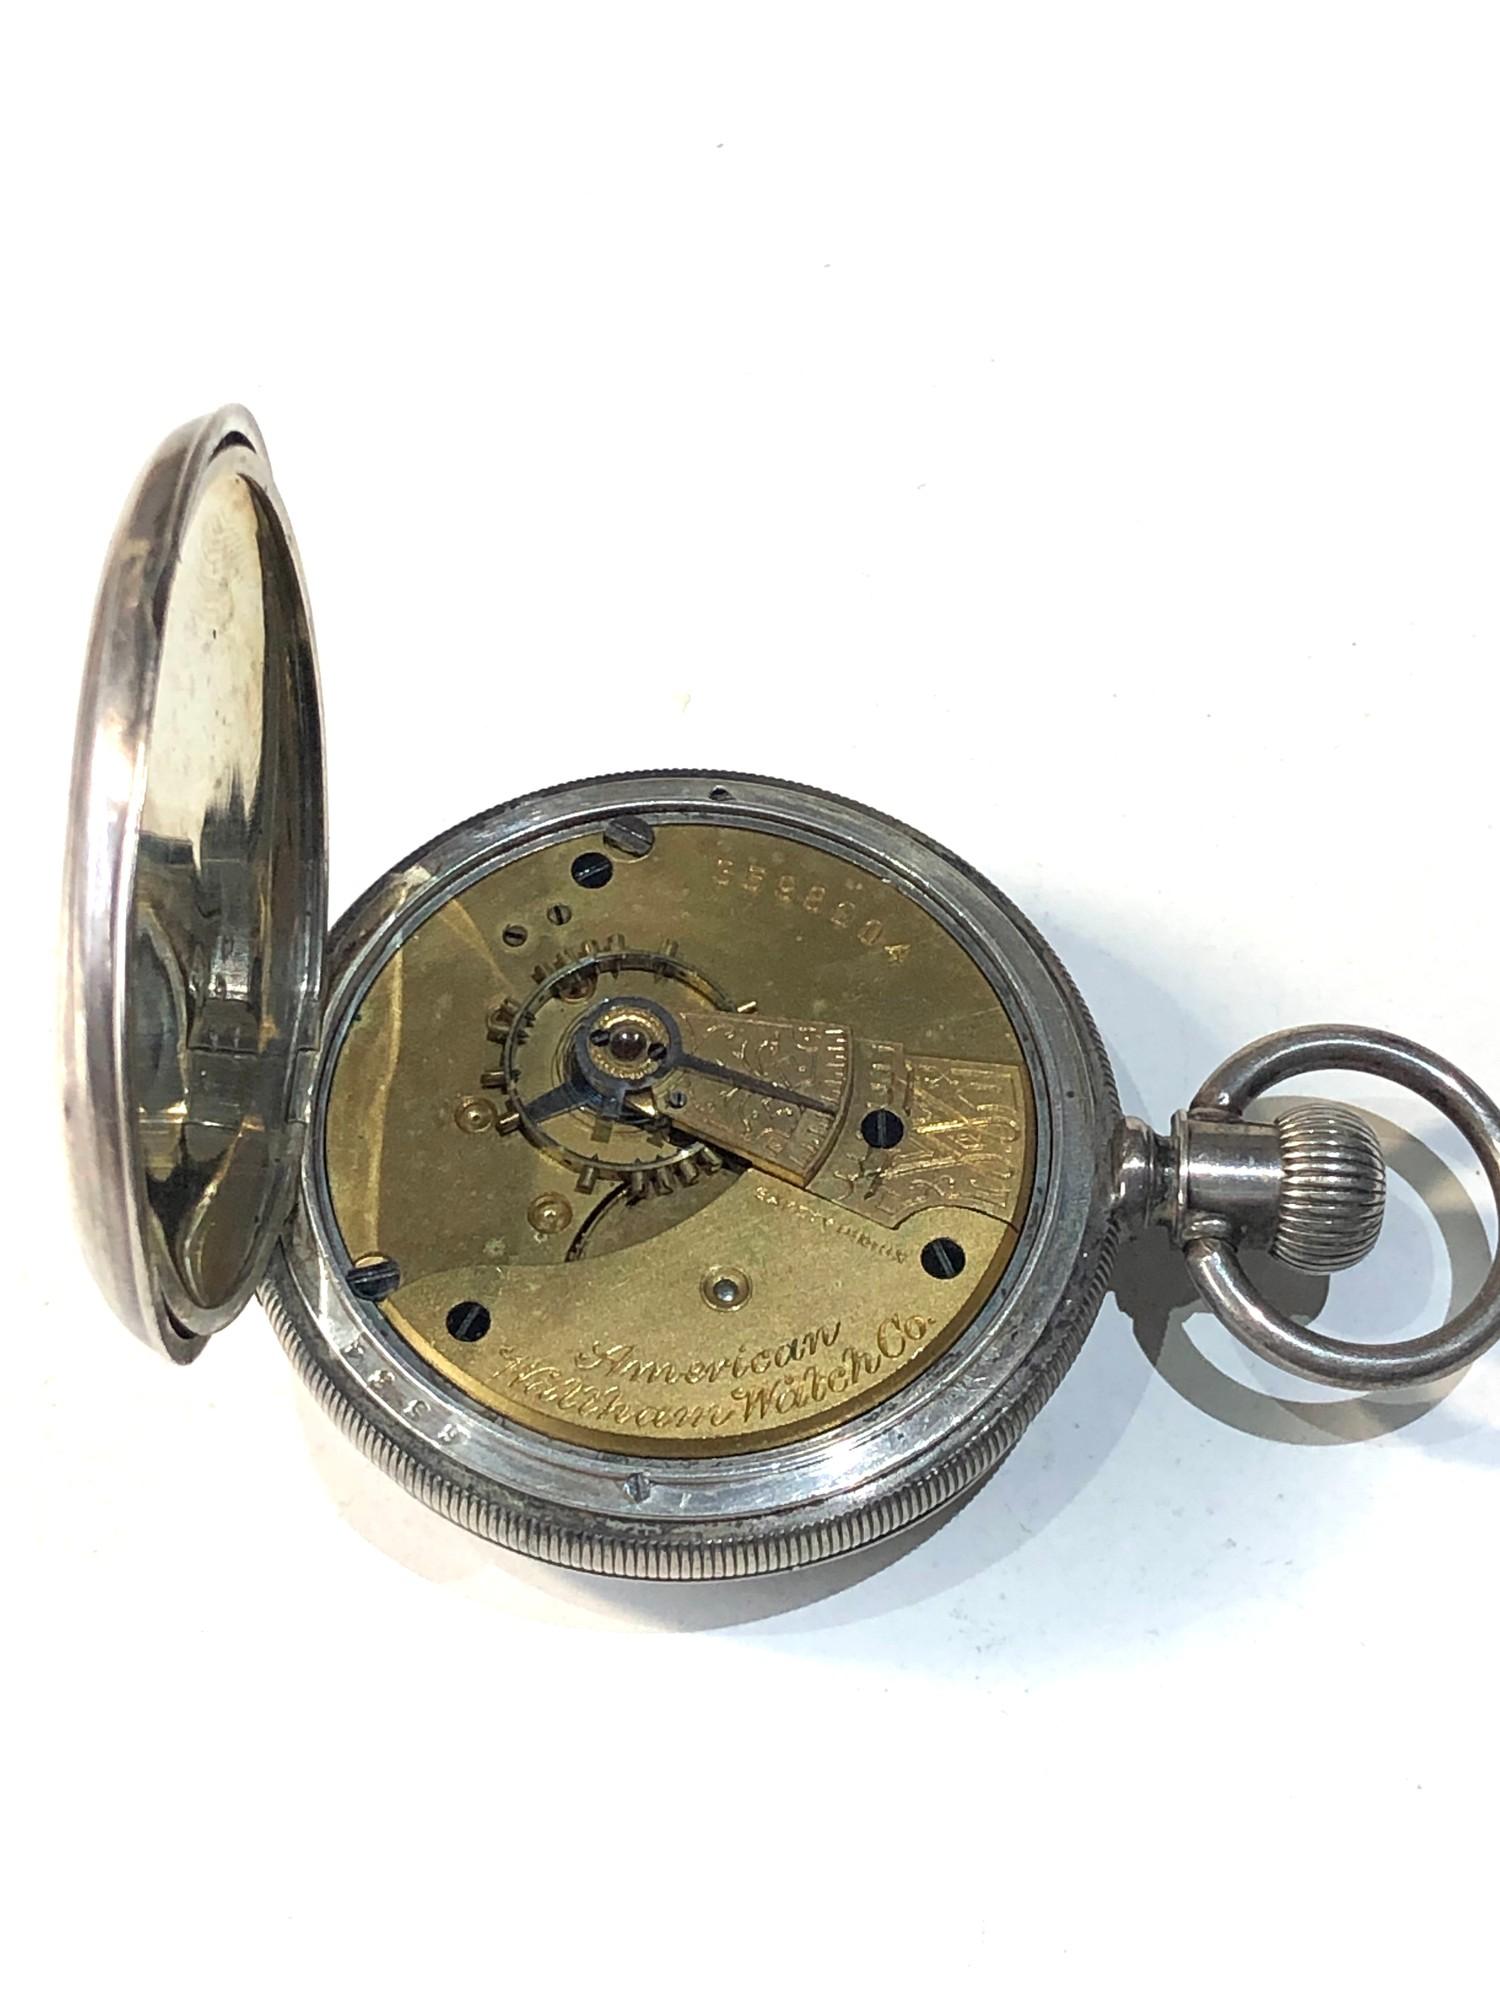 Antique silver cased Am watch Co waltham pocket watch balance will spin does not tick keeps - Image 4 of 5